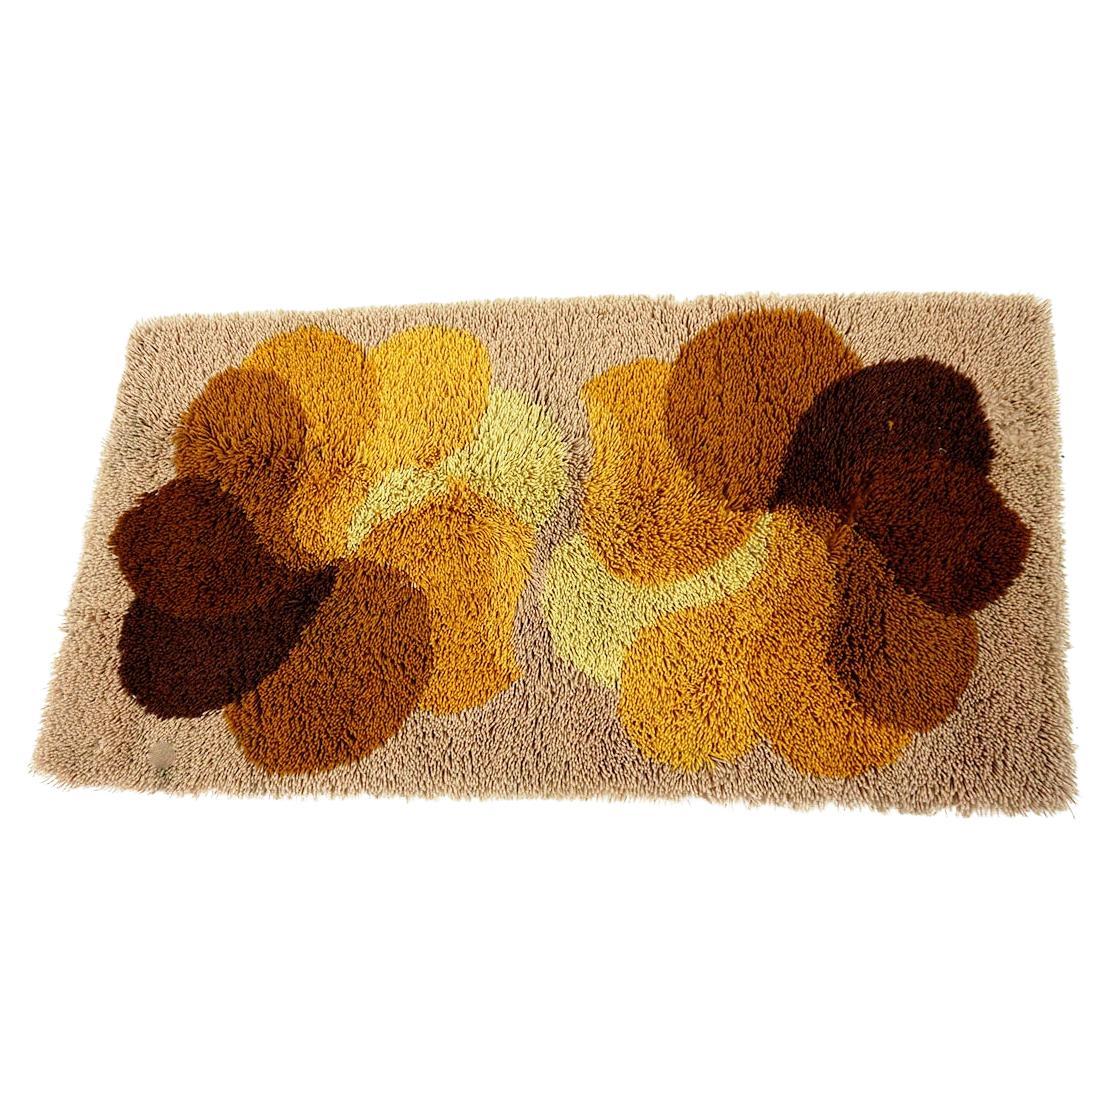 Vintage Brown and Yellow Flower Wool Rug by Desso, Netherlands, 1970s For Sale